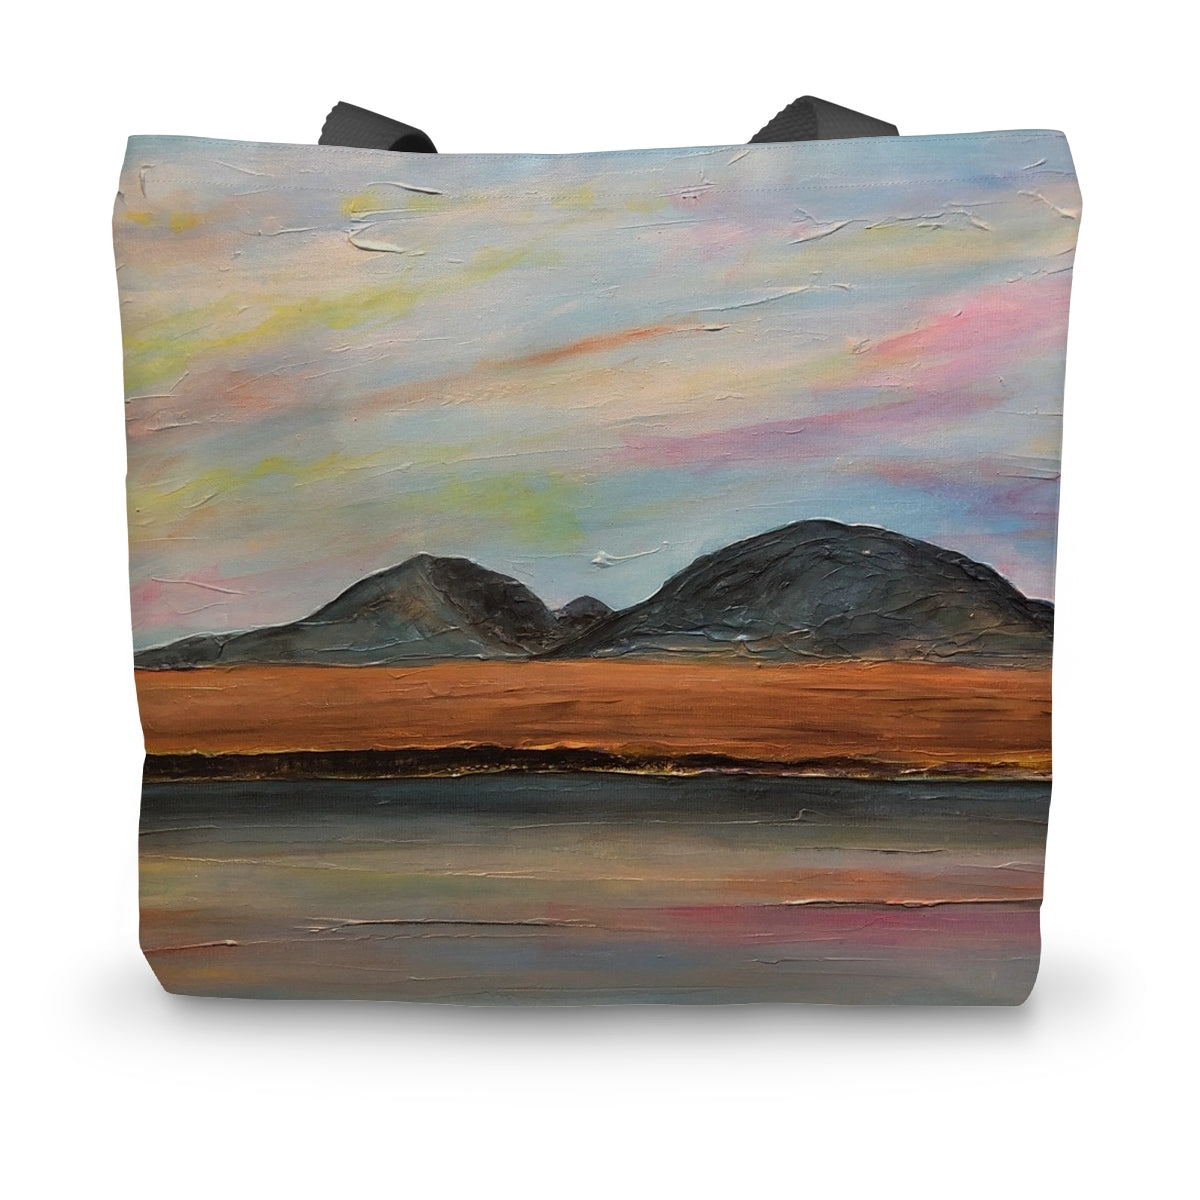 Jura Dawn Art Gifts Canvas Tote Bag-Bags-Hebridean Islands Art Gallery-14"x18.5"-Paintings, Prints, Homeware, Art Gifts From Scotland By Scottish Artist Kevin Hunter